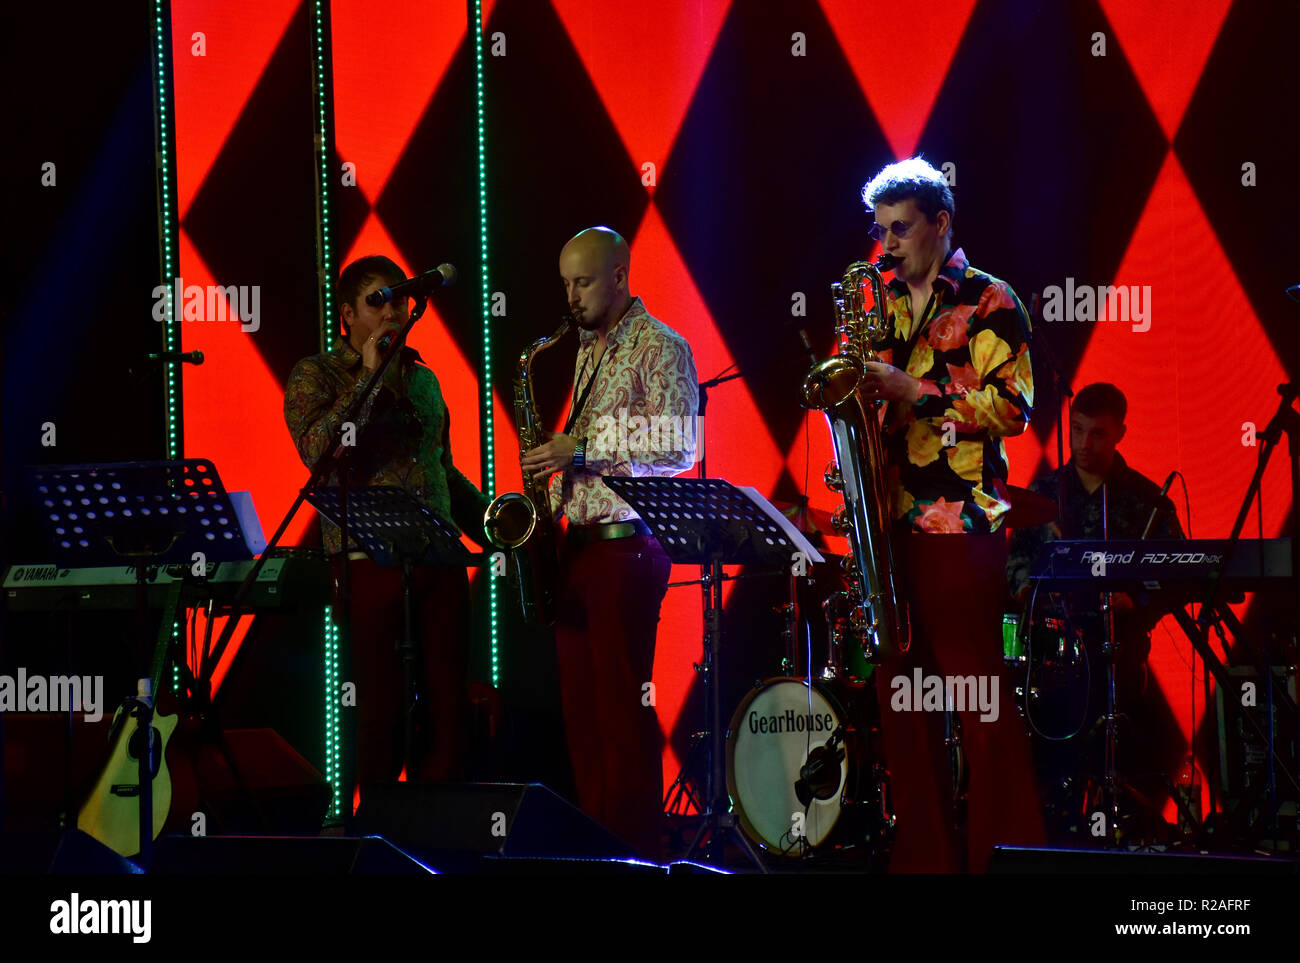 Mumbai, India. 17 November, 2018. The artists from Retro Band perform at Bluestar's Platinum Jubilee event at hotel JW Marriott Sahar in Mumbai. The Retro Band came from United Kingdom to perform 1st time in India. Azhar Khan/Alamy Live News Stock Photo